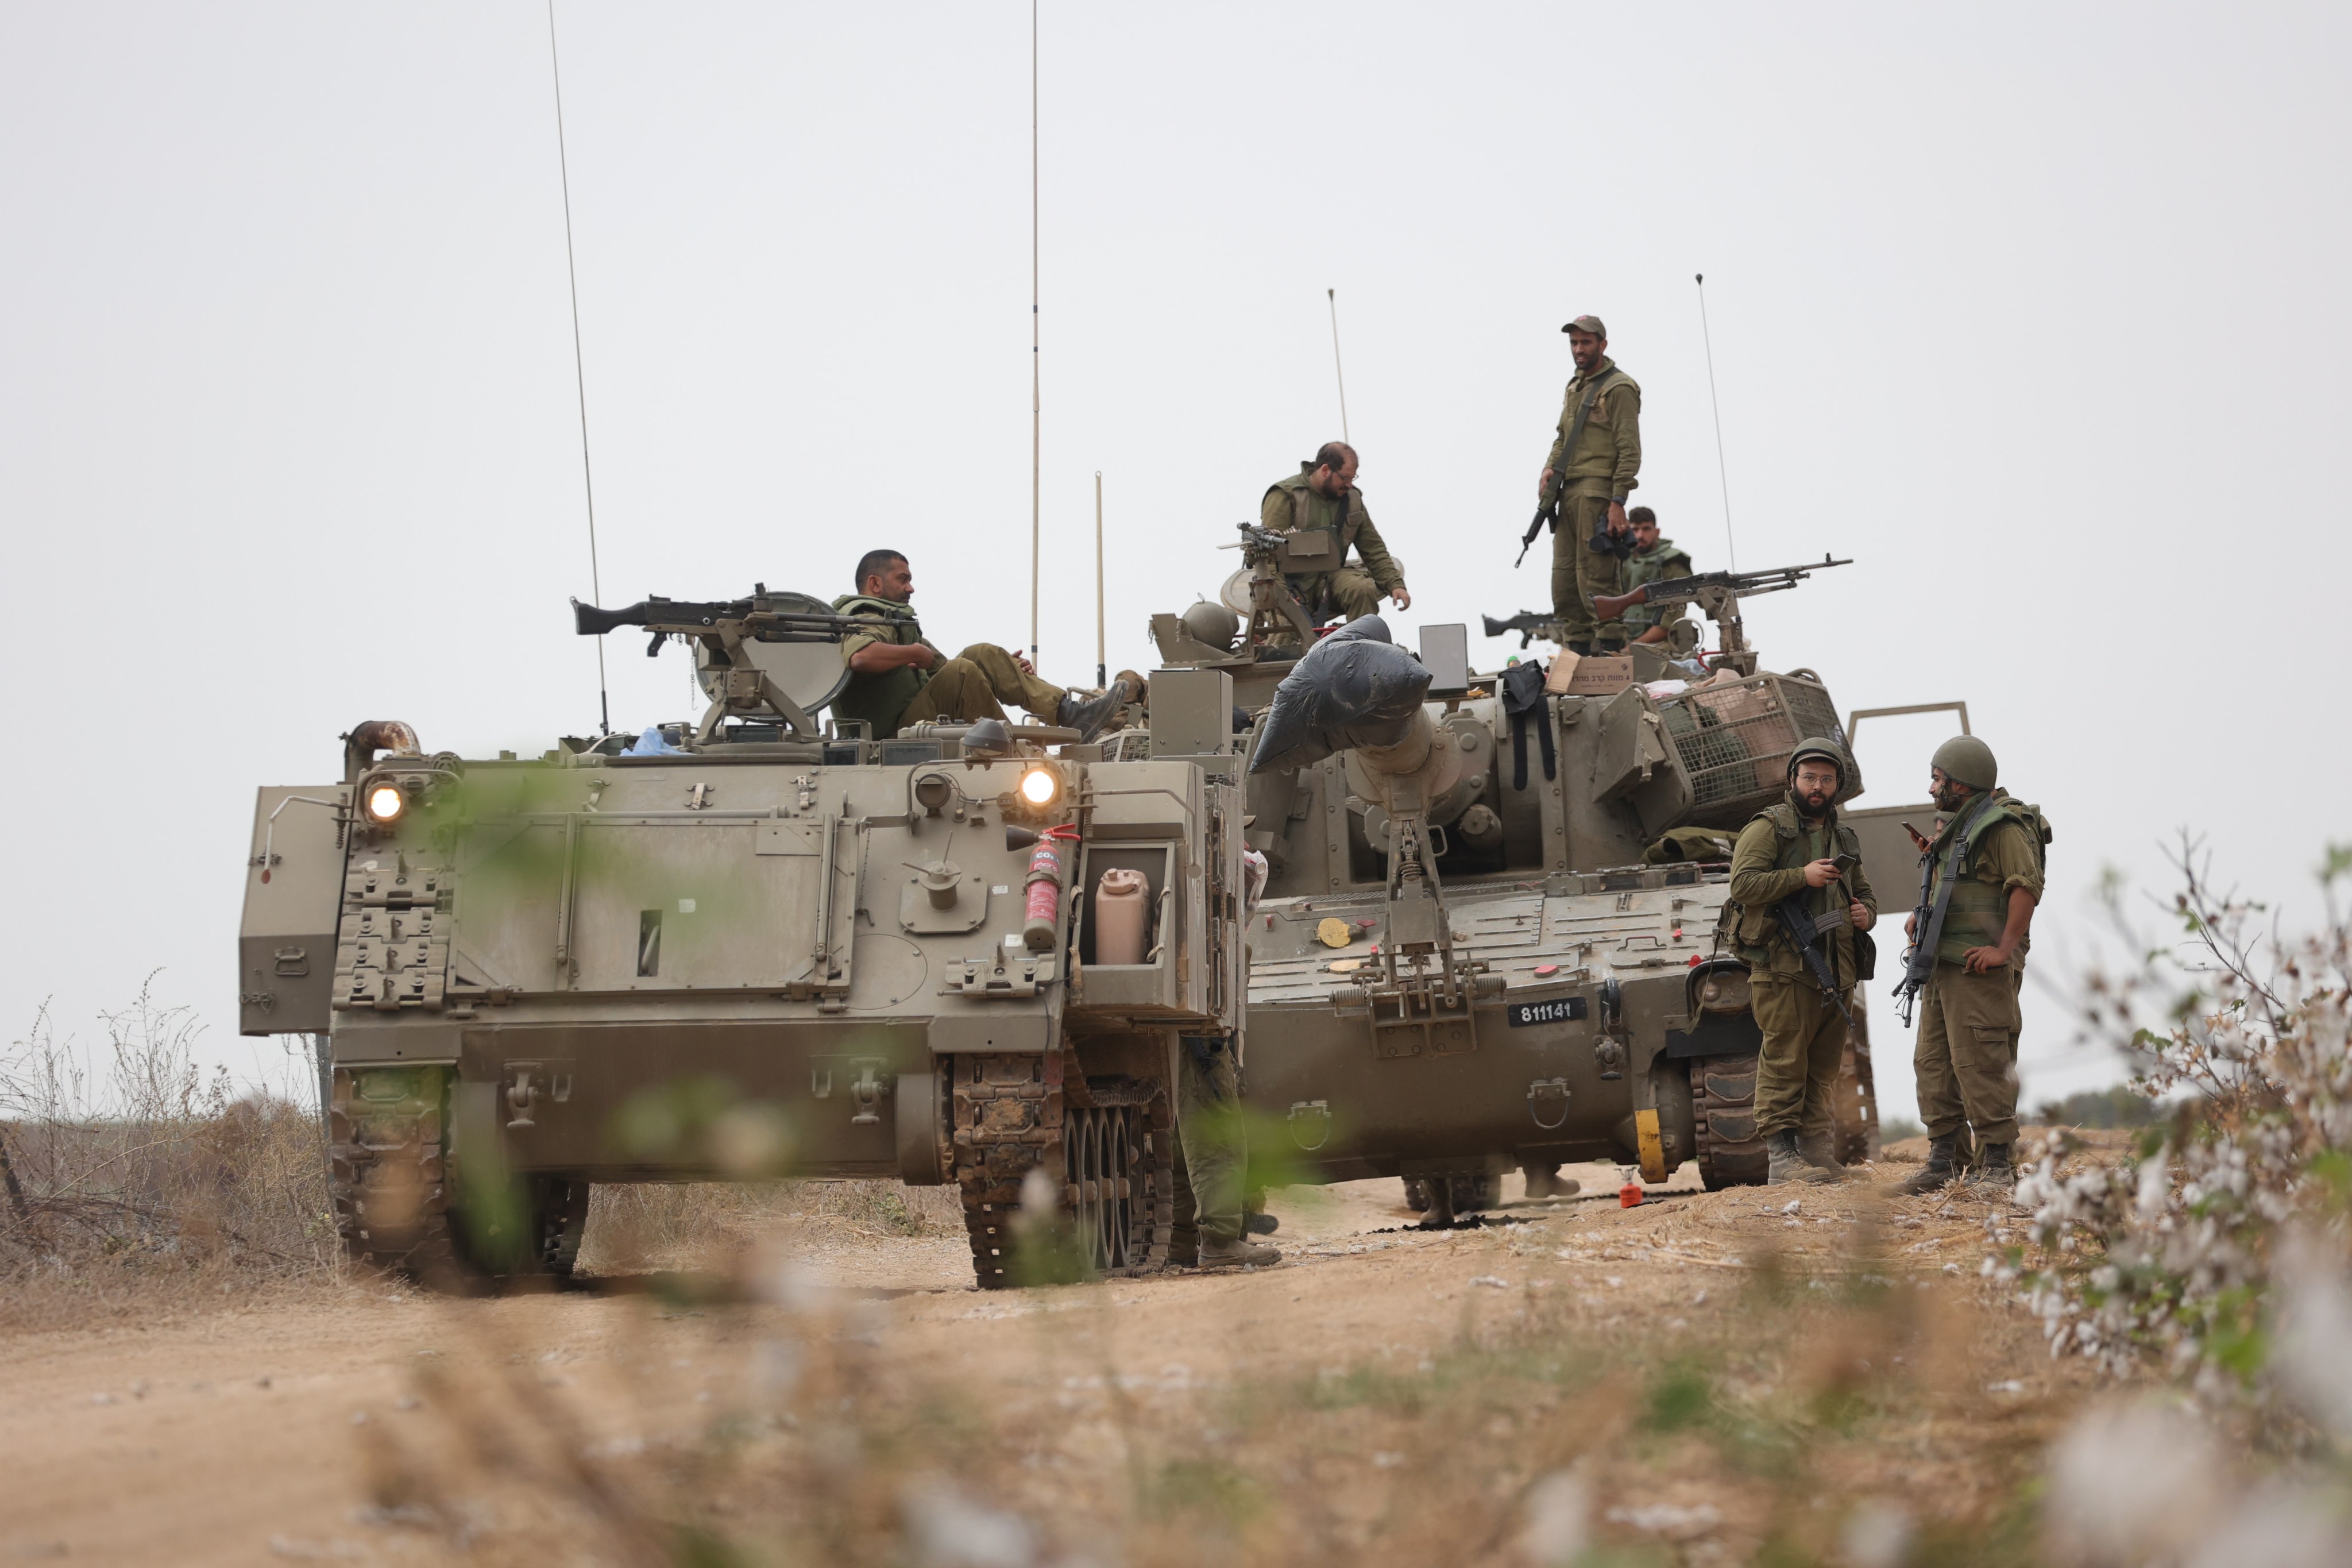 Israeli soldiers pictured near the border with Gaza. Photo: EPA-EFE